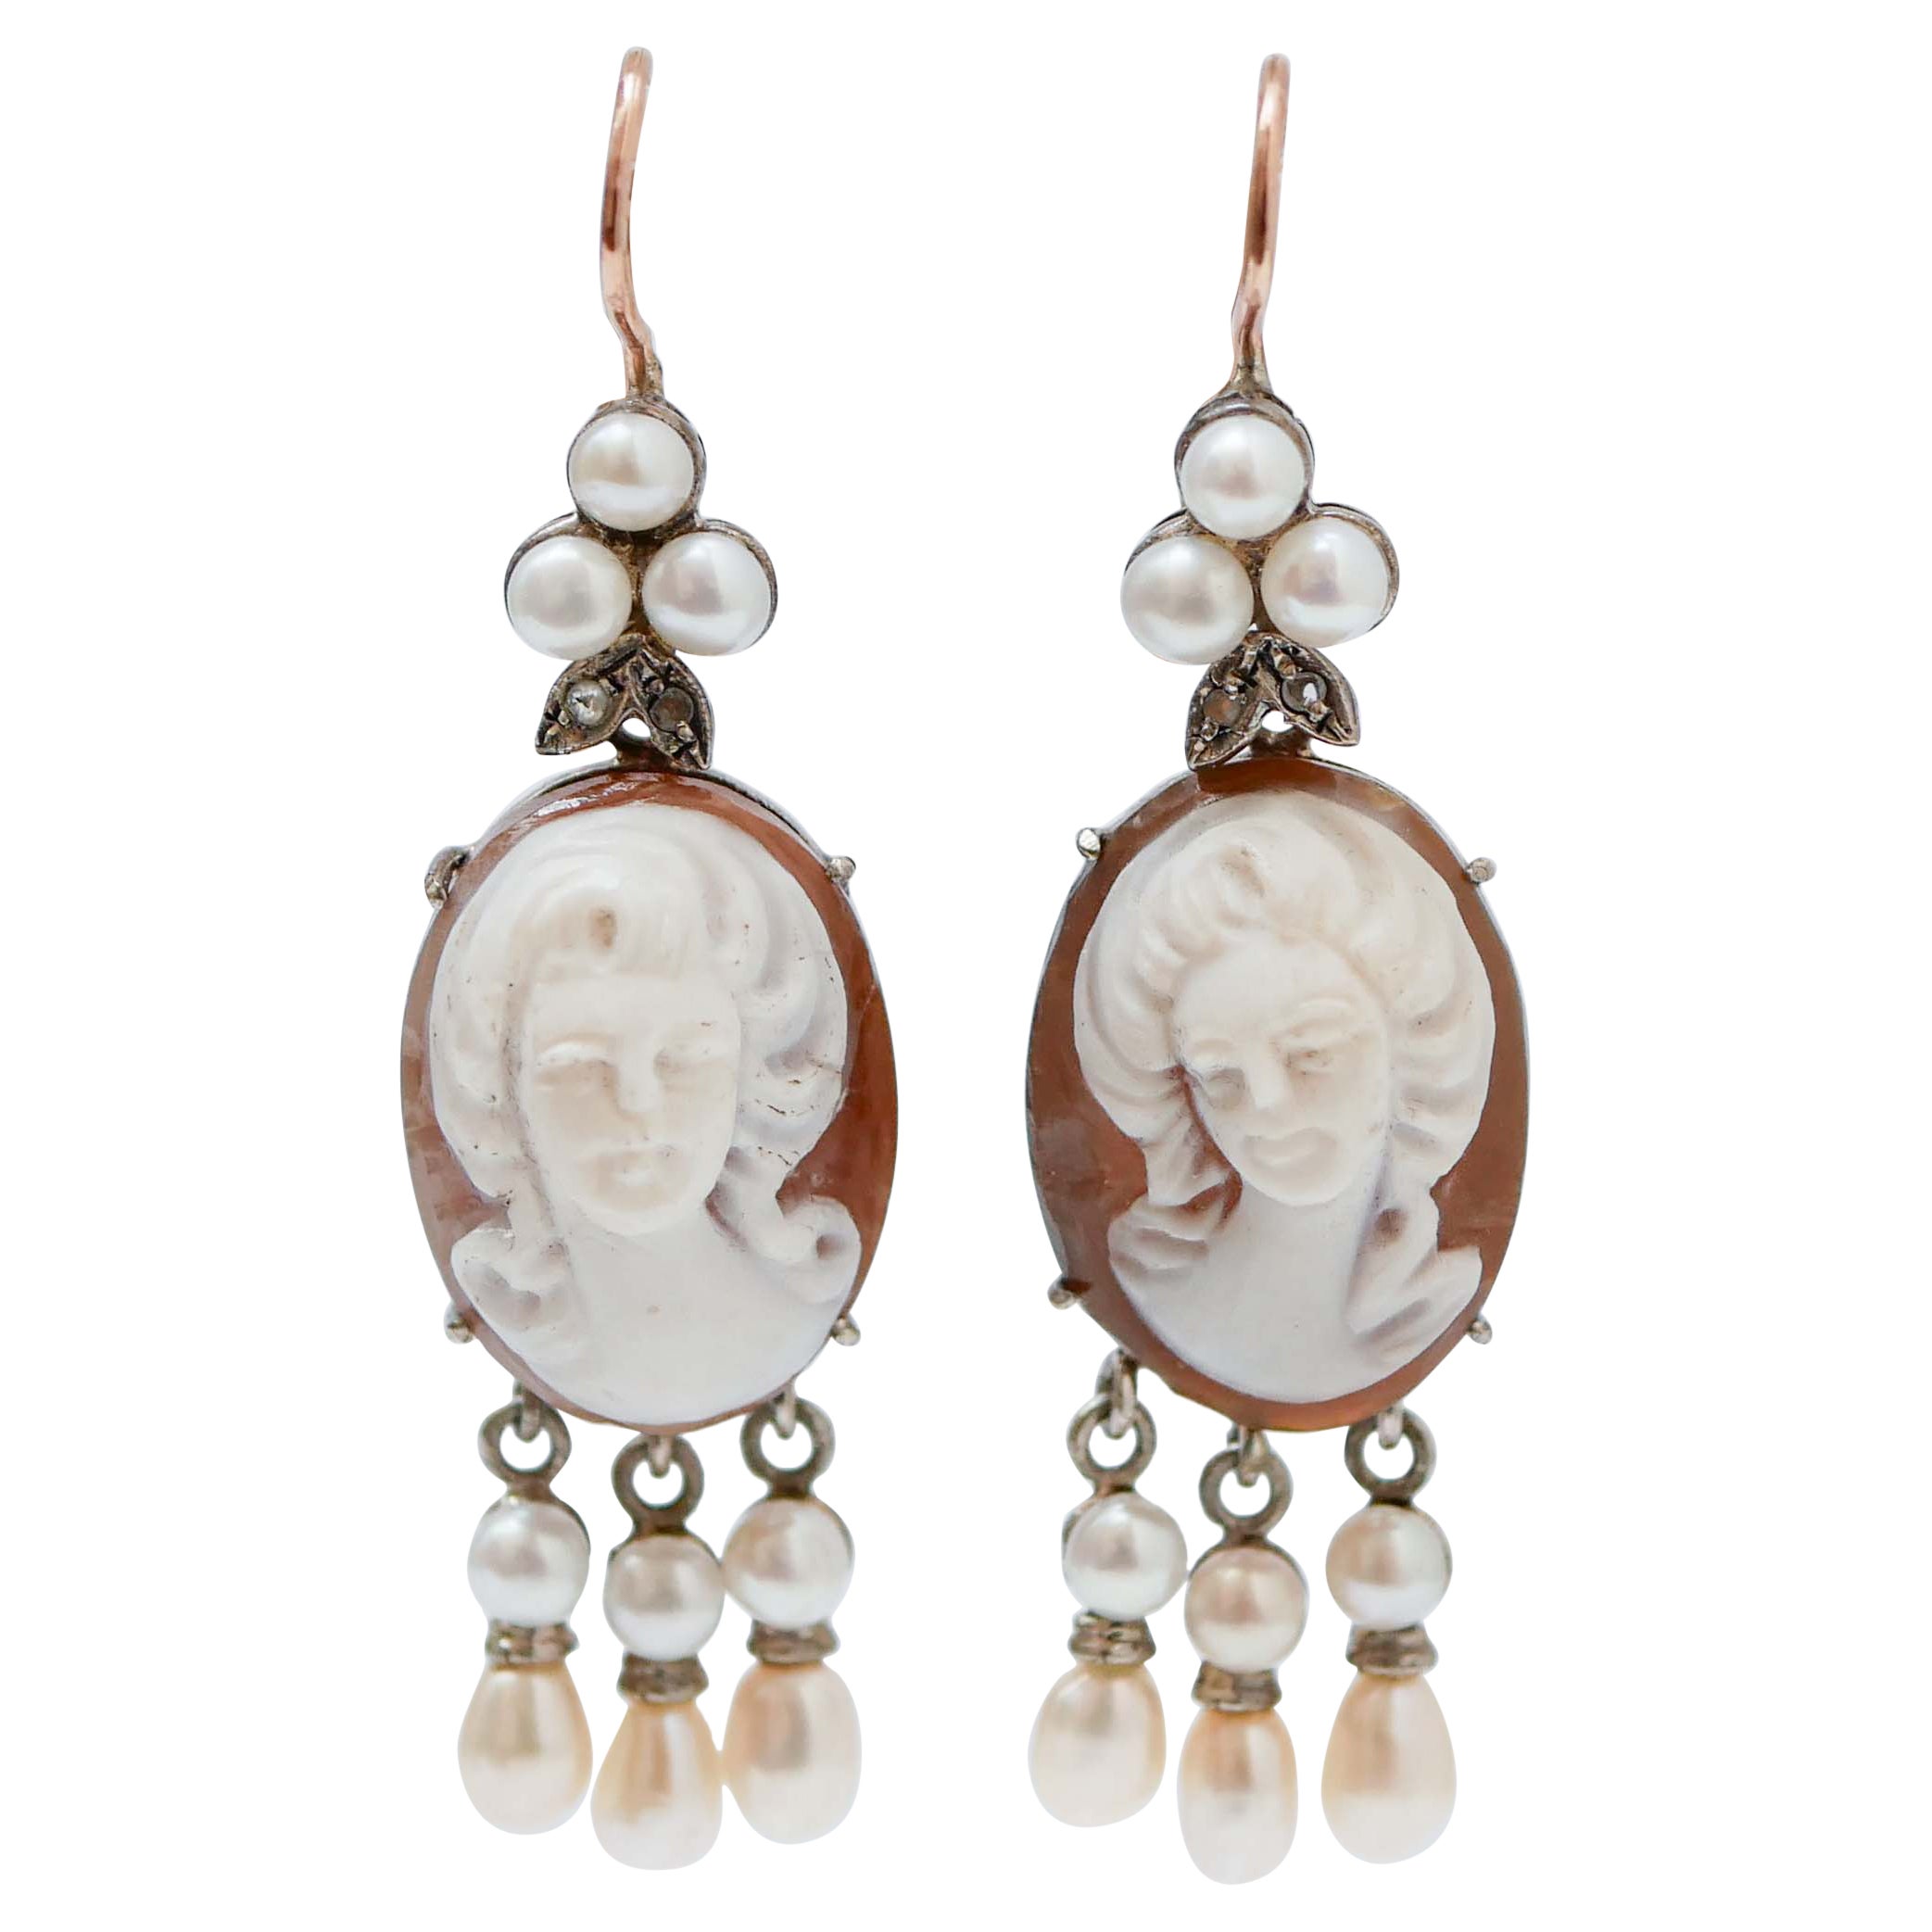 Cameo, Pearls, Diamonds, Rose Gold and Silver Retrò Earrings.